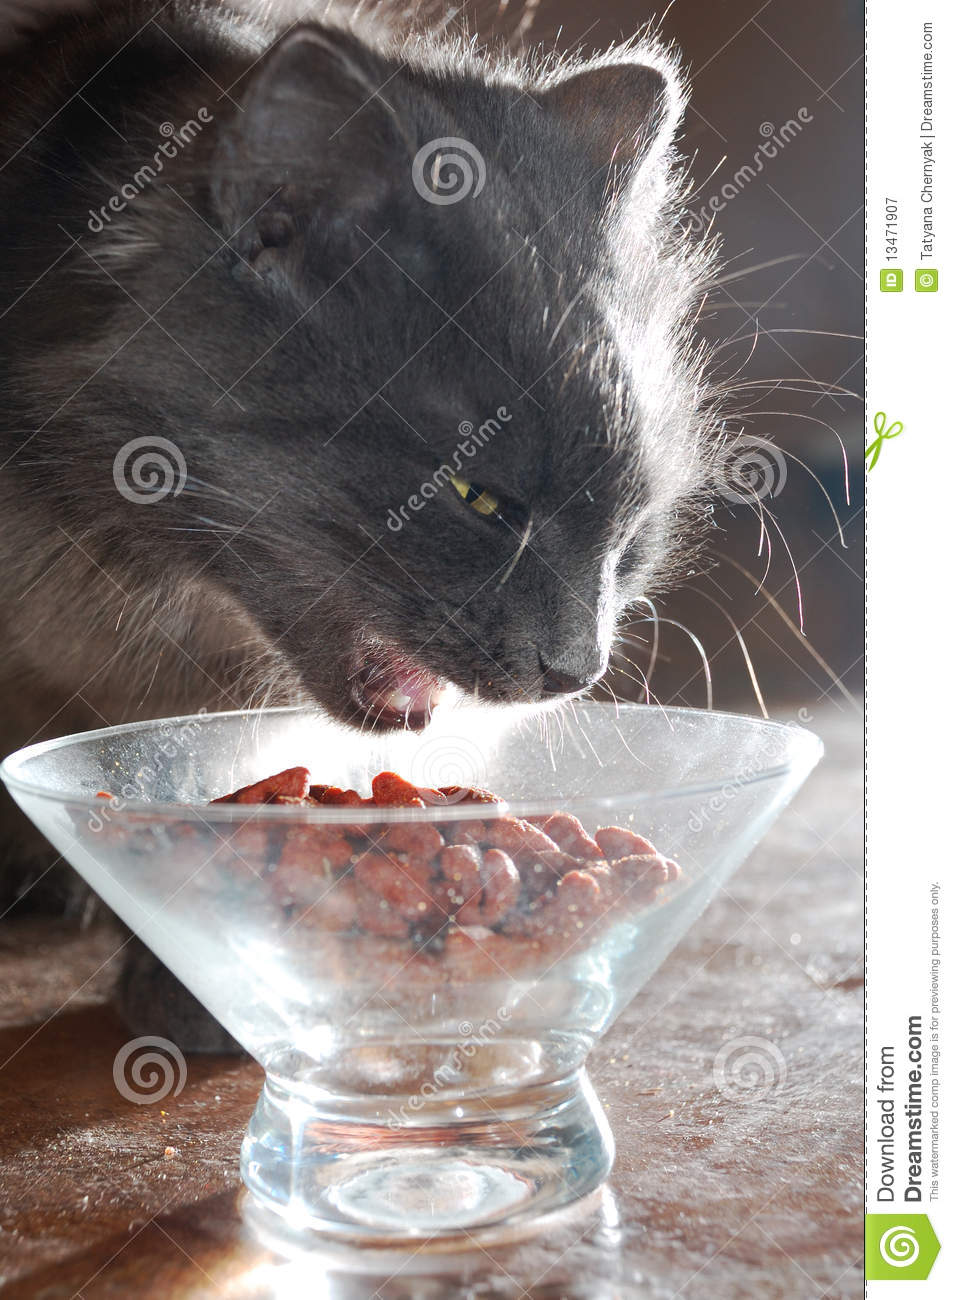 Cat Eating Food Royalty Free Stock Photography   Image  13471907